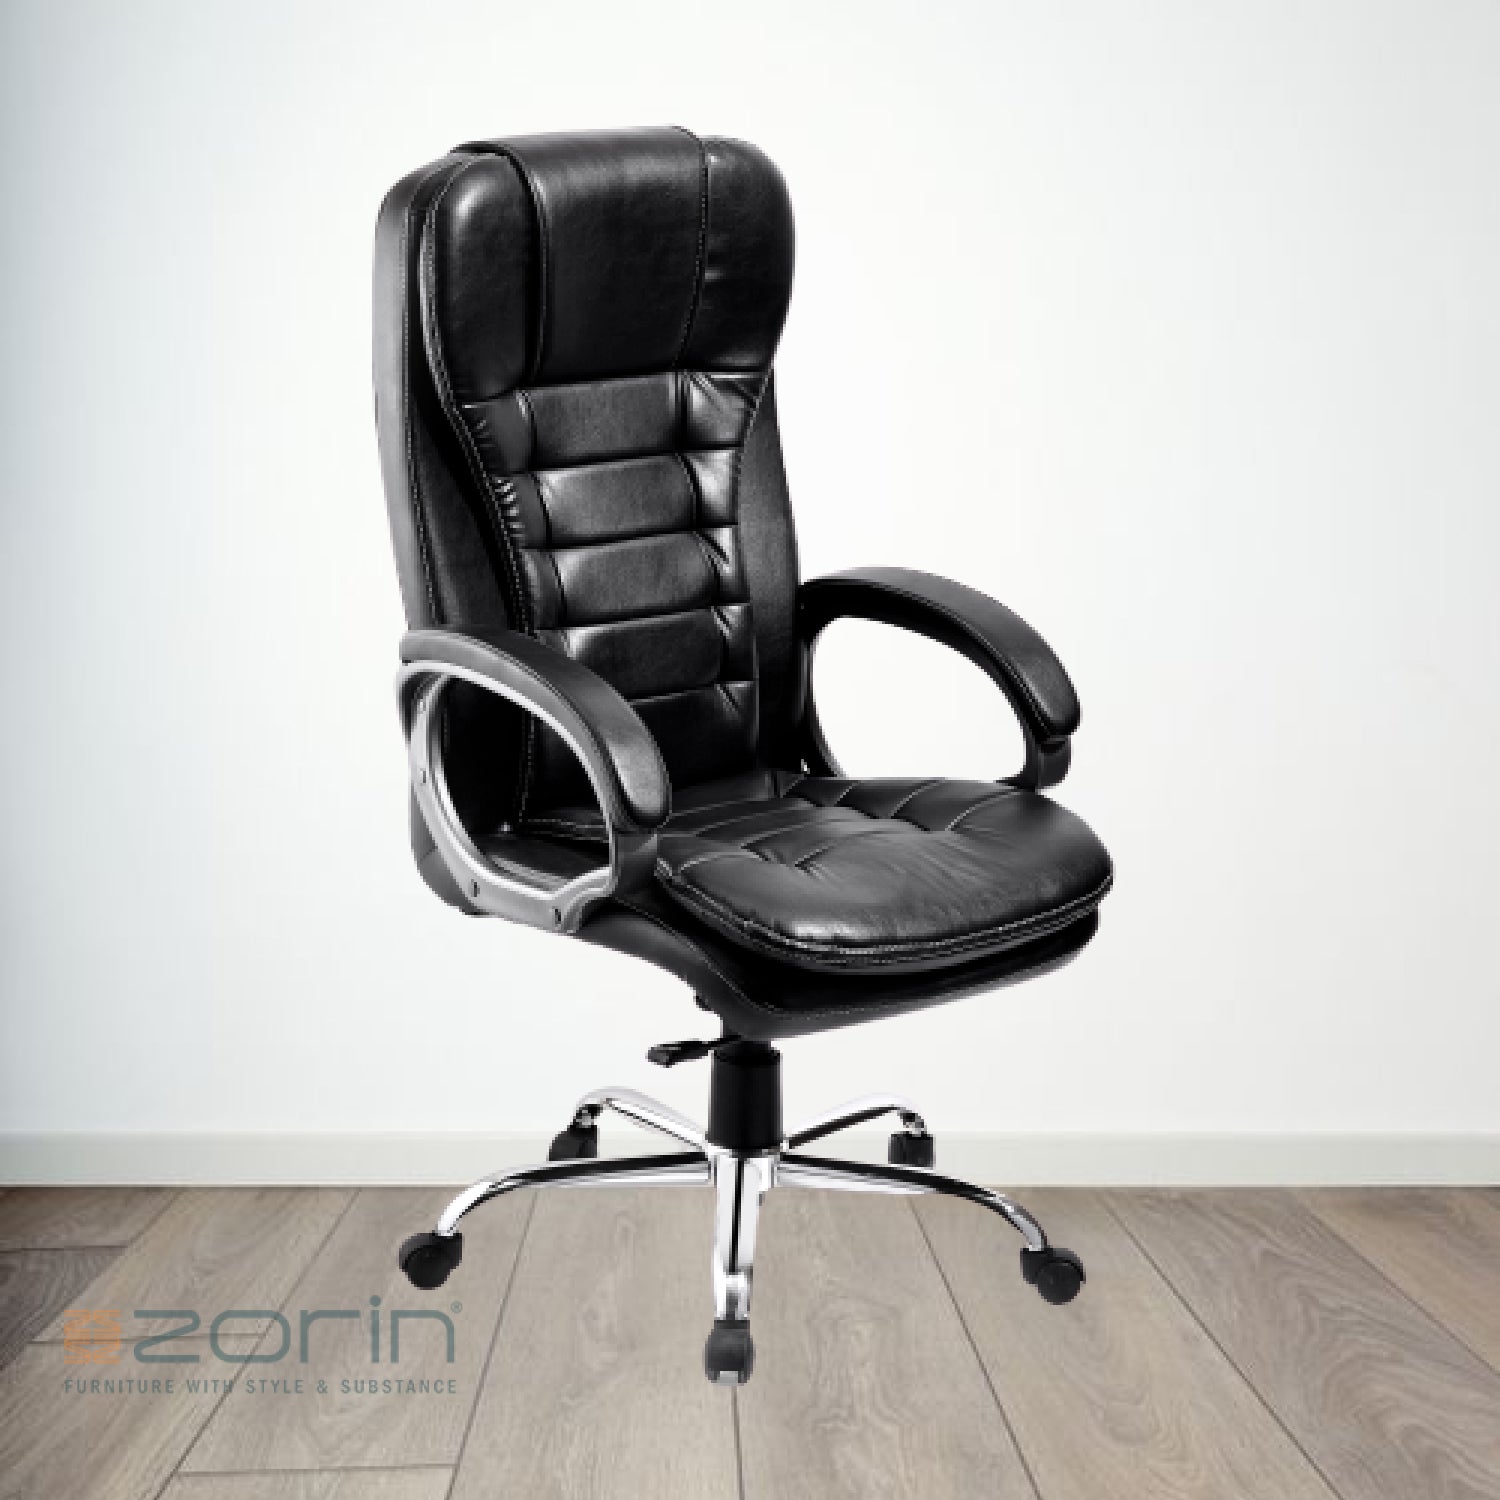 ZSE1029 High Back Chair by Zorin in Black Color Zorin